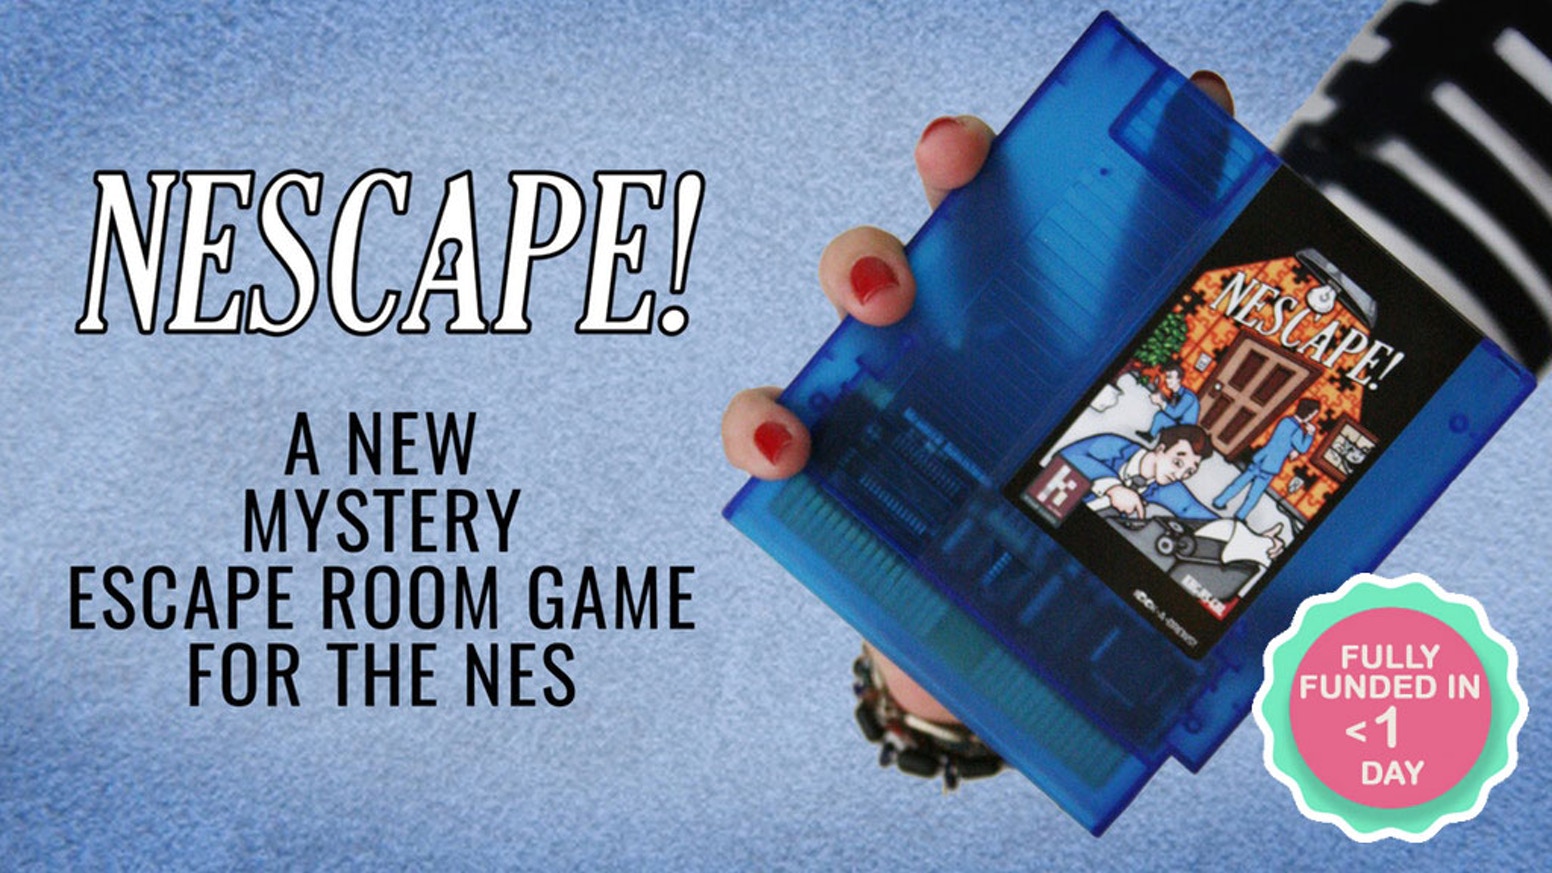 New Games Created for Classic Systems - NEScape!